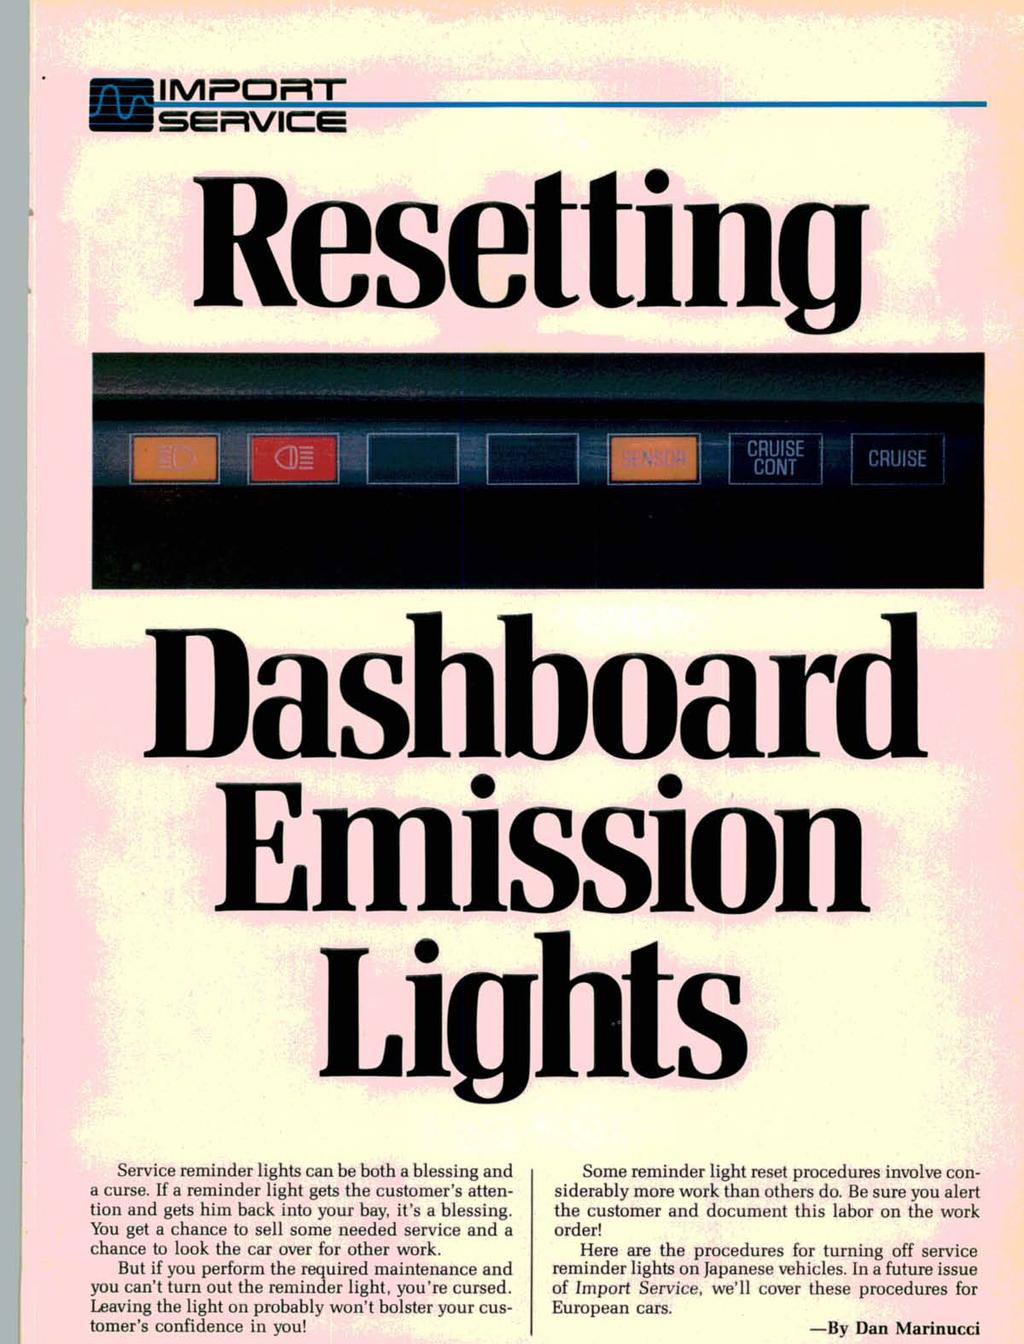 IIV/II Resetting Dashboard Emission Lights Service reminder lights can be both a blessing and a curse.